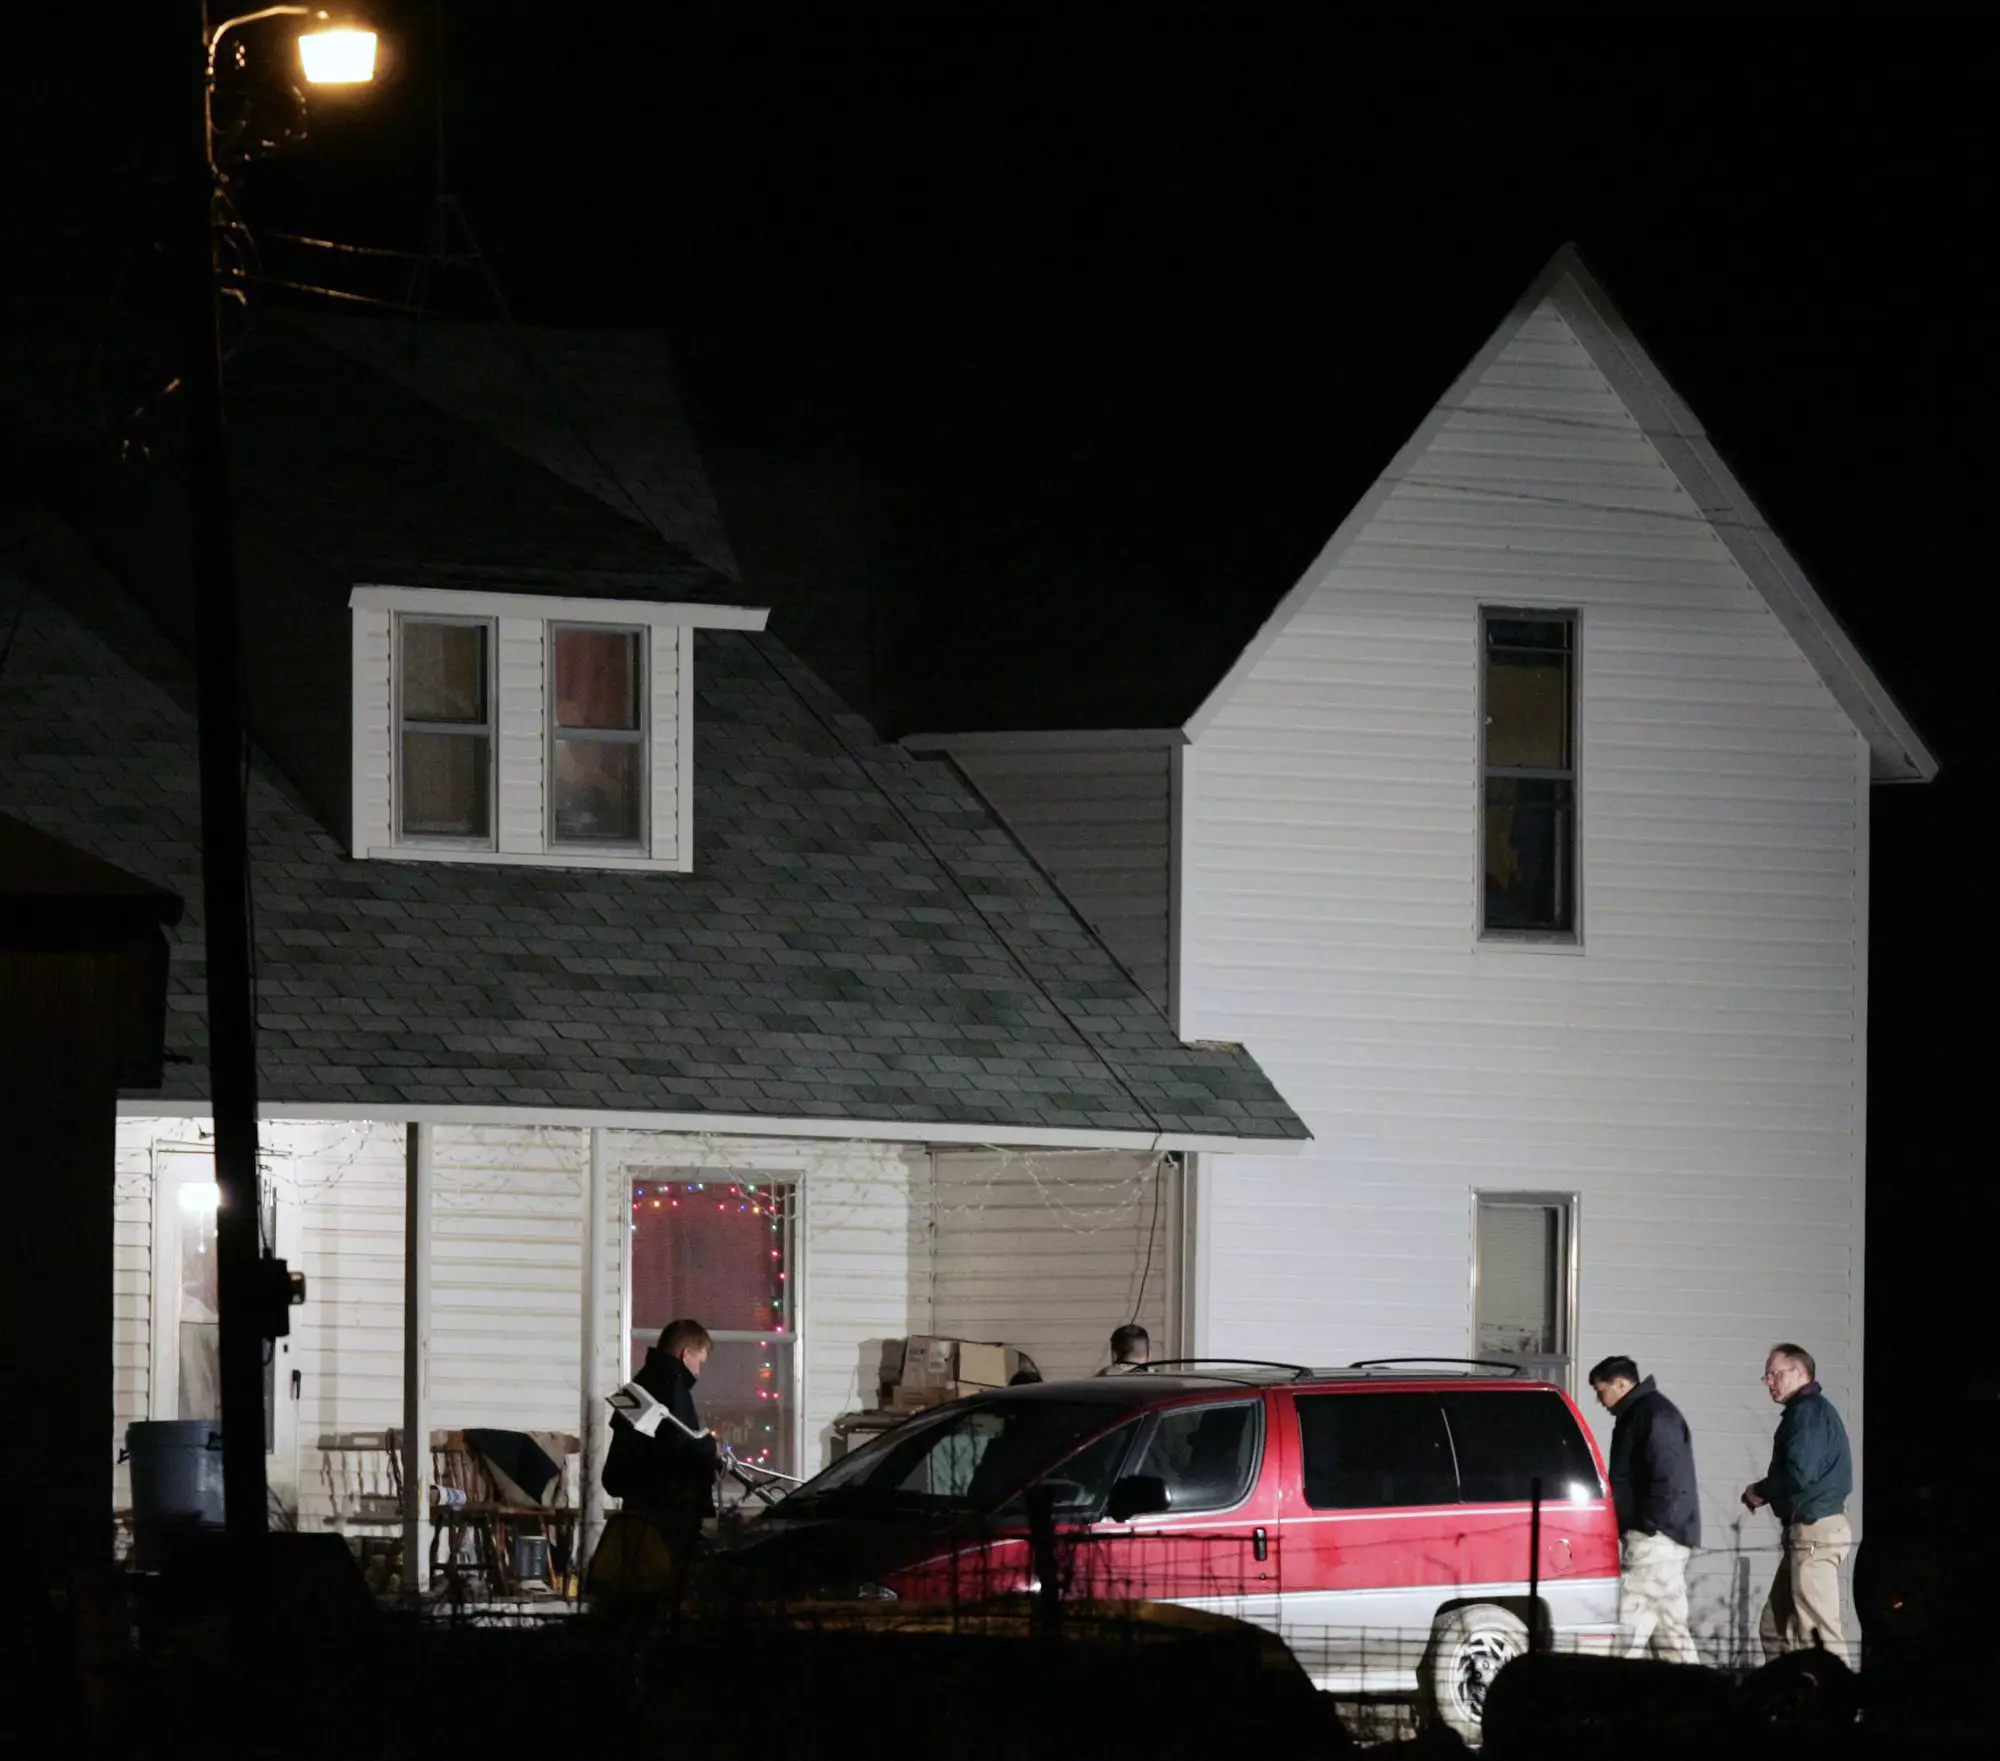 Police during the investigation.